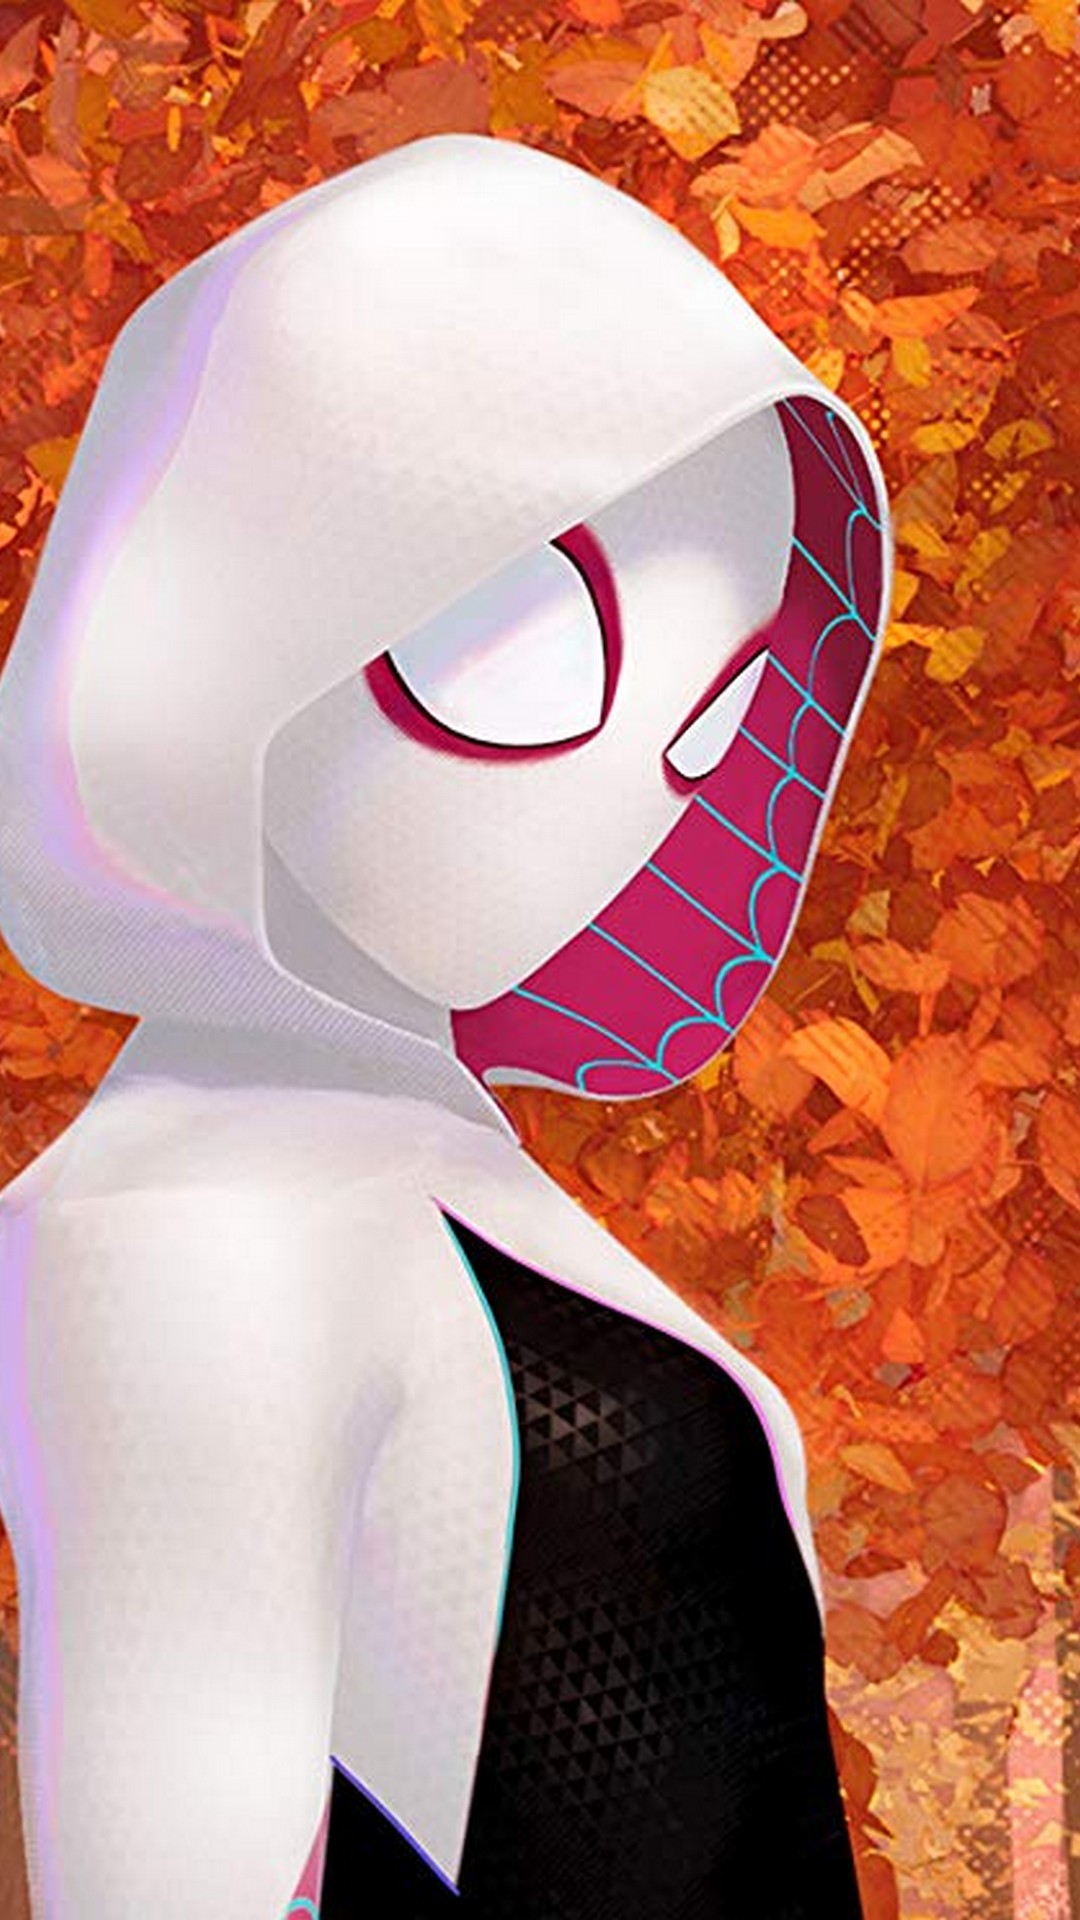 Spider-Man Into the Spider-Verse Wallpaper For iPhone with image resolution 1080x1920 pixel. You can use this wallpaper as background for your desktop Computer Screensavers, Android or iPhone smartphones